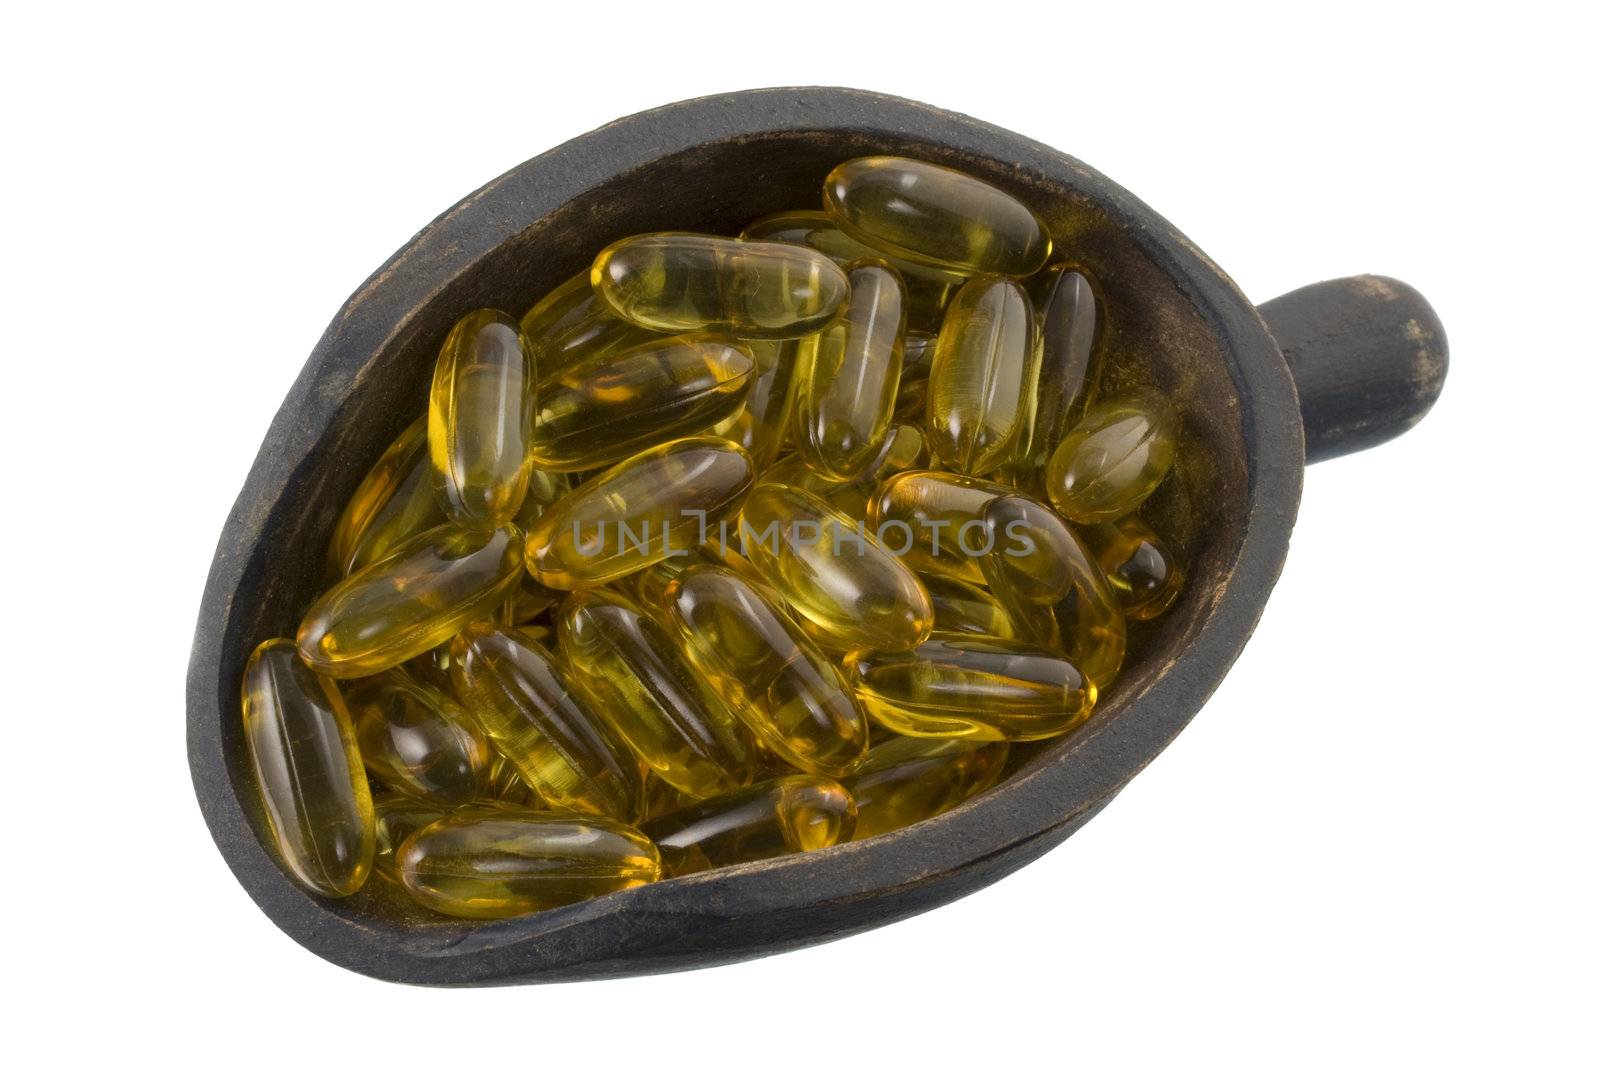 fish oil supplement softgels on a primitive, wooden, dark painted scoop, isolated on white